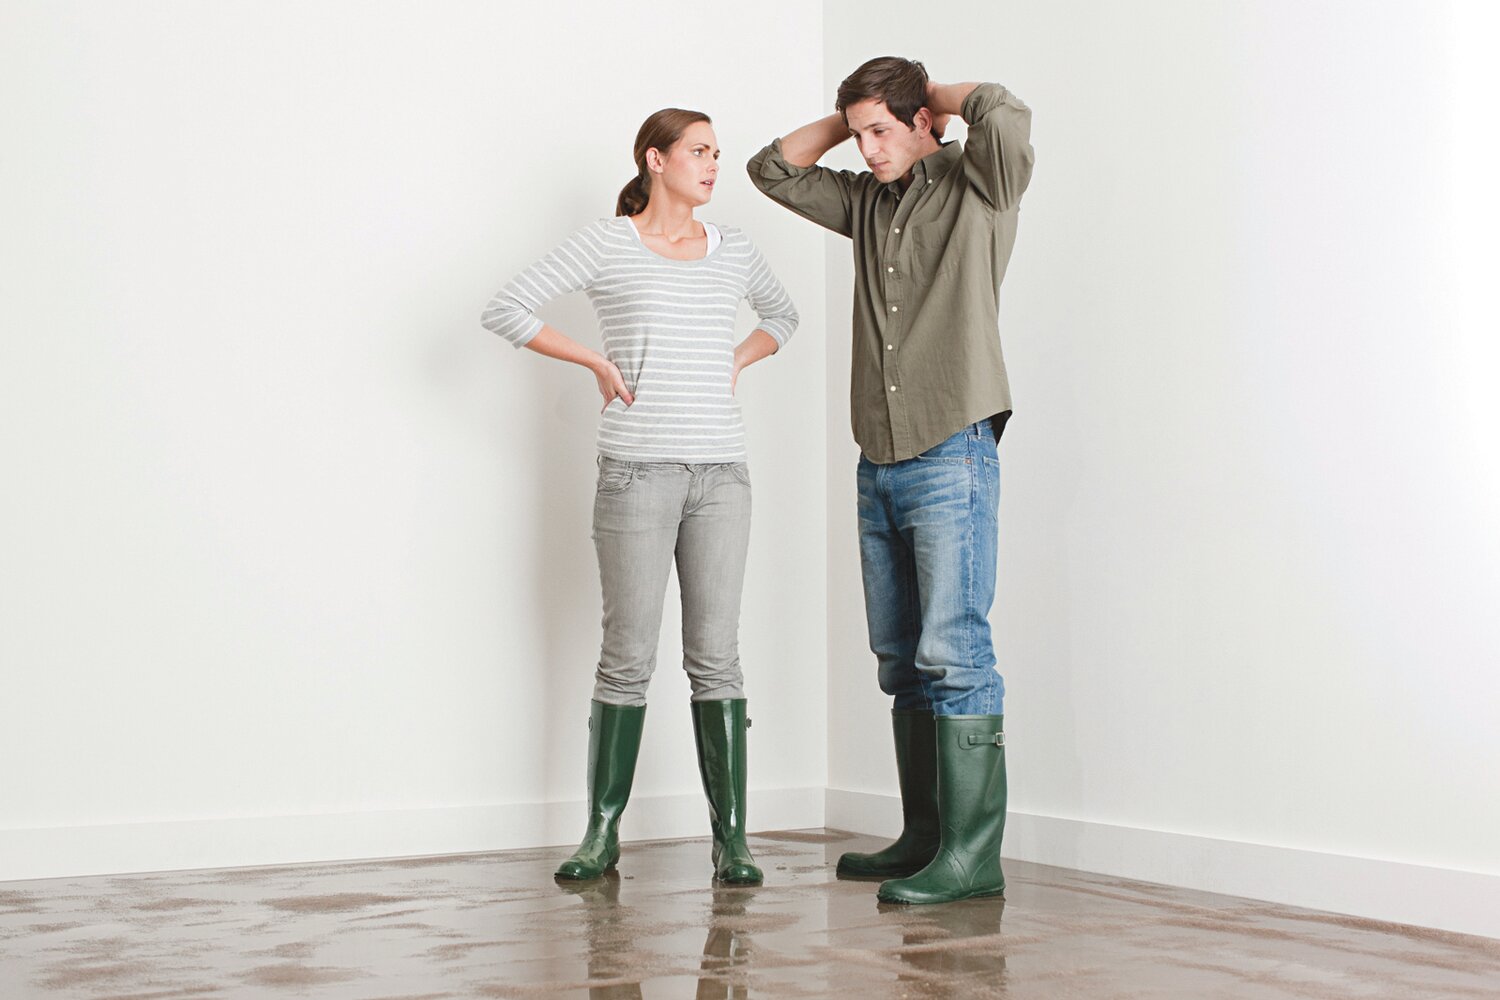 Many homeowners assume that flooding is included in their homeowners  
insurance policy when in fact, most homeowners policies do not cover  
flooding.
(c) Image Source / iStock via Getty Images Plus